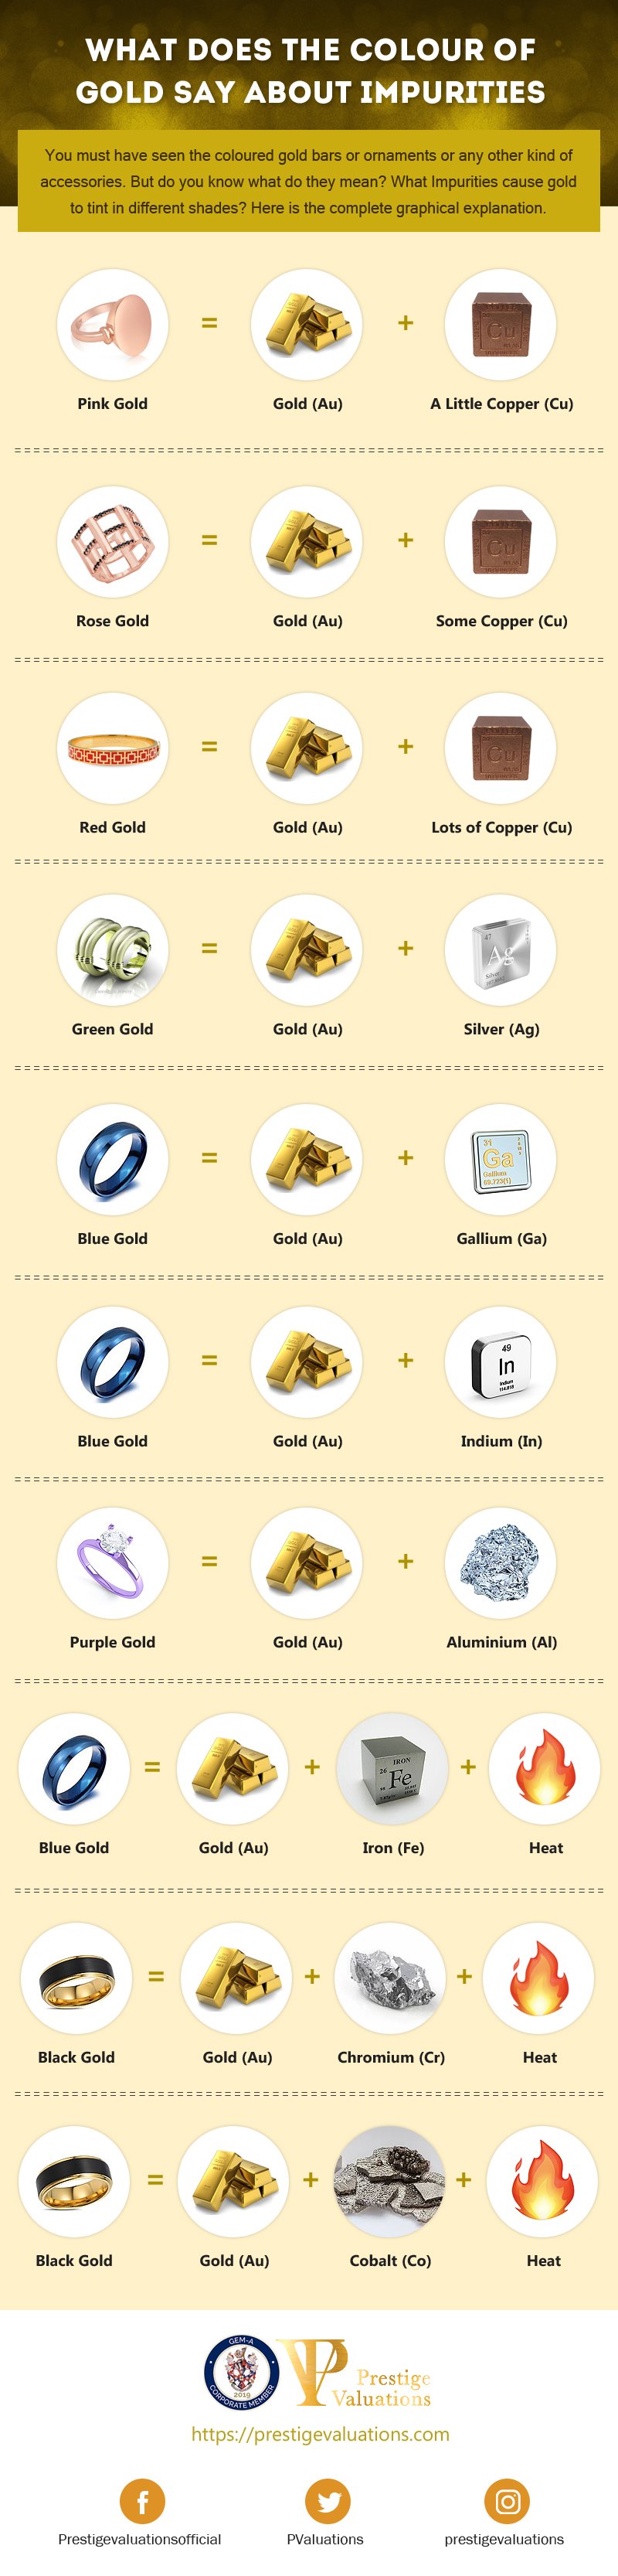 What Colour Of Gold Say About Impurities